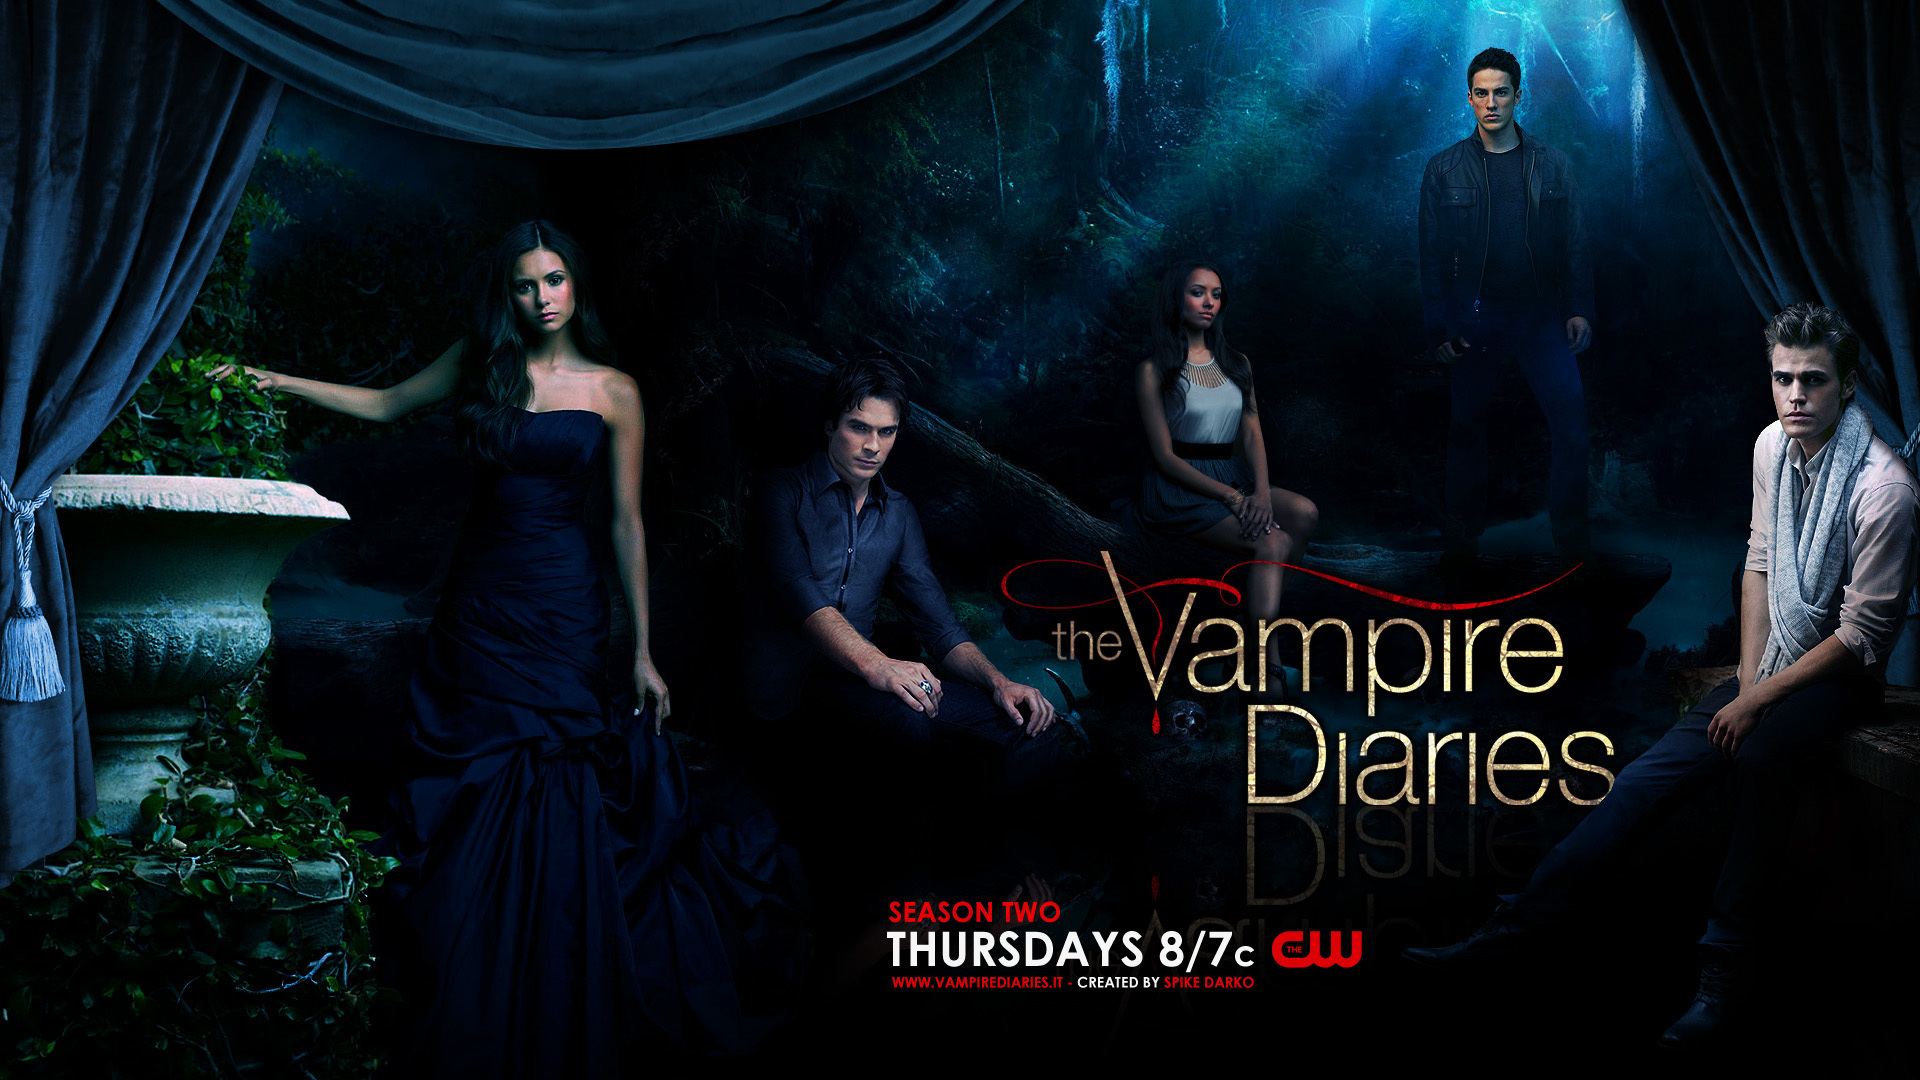 The Vampire Diaries characters in the forest desktop wallpaper 24283